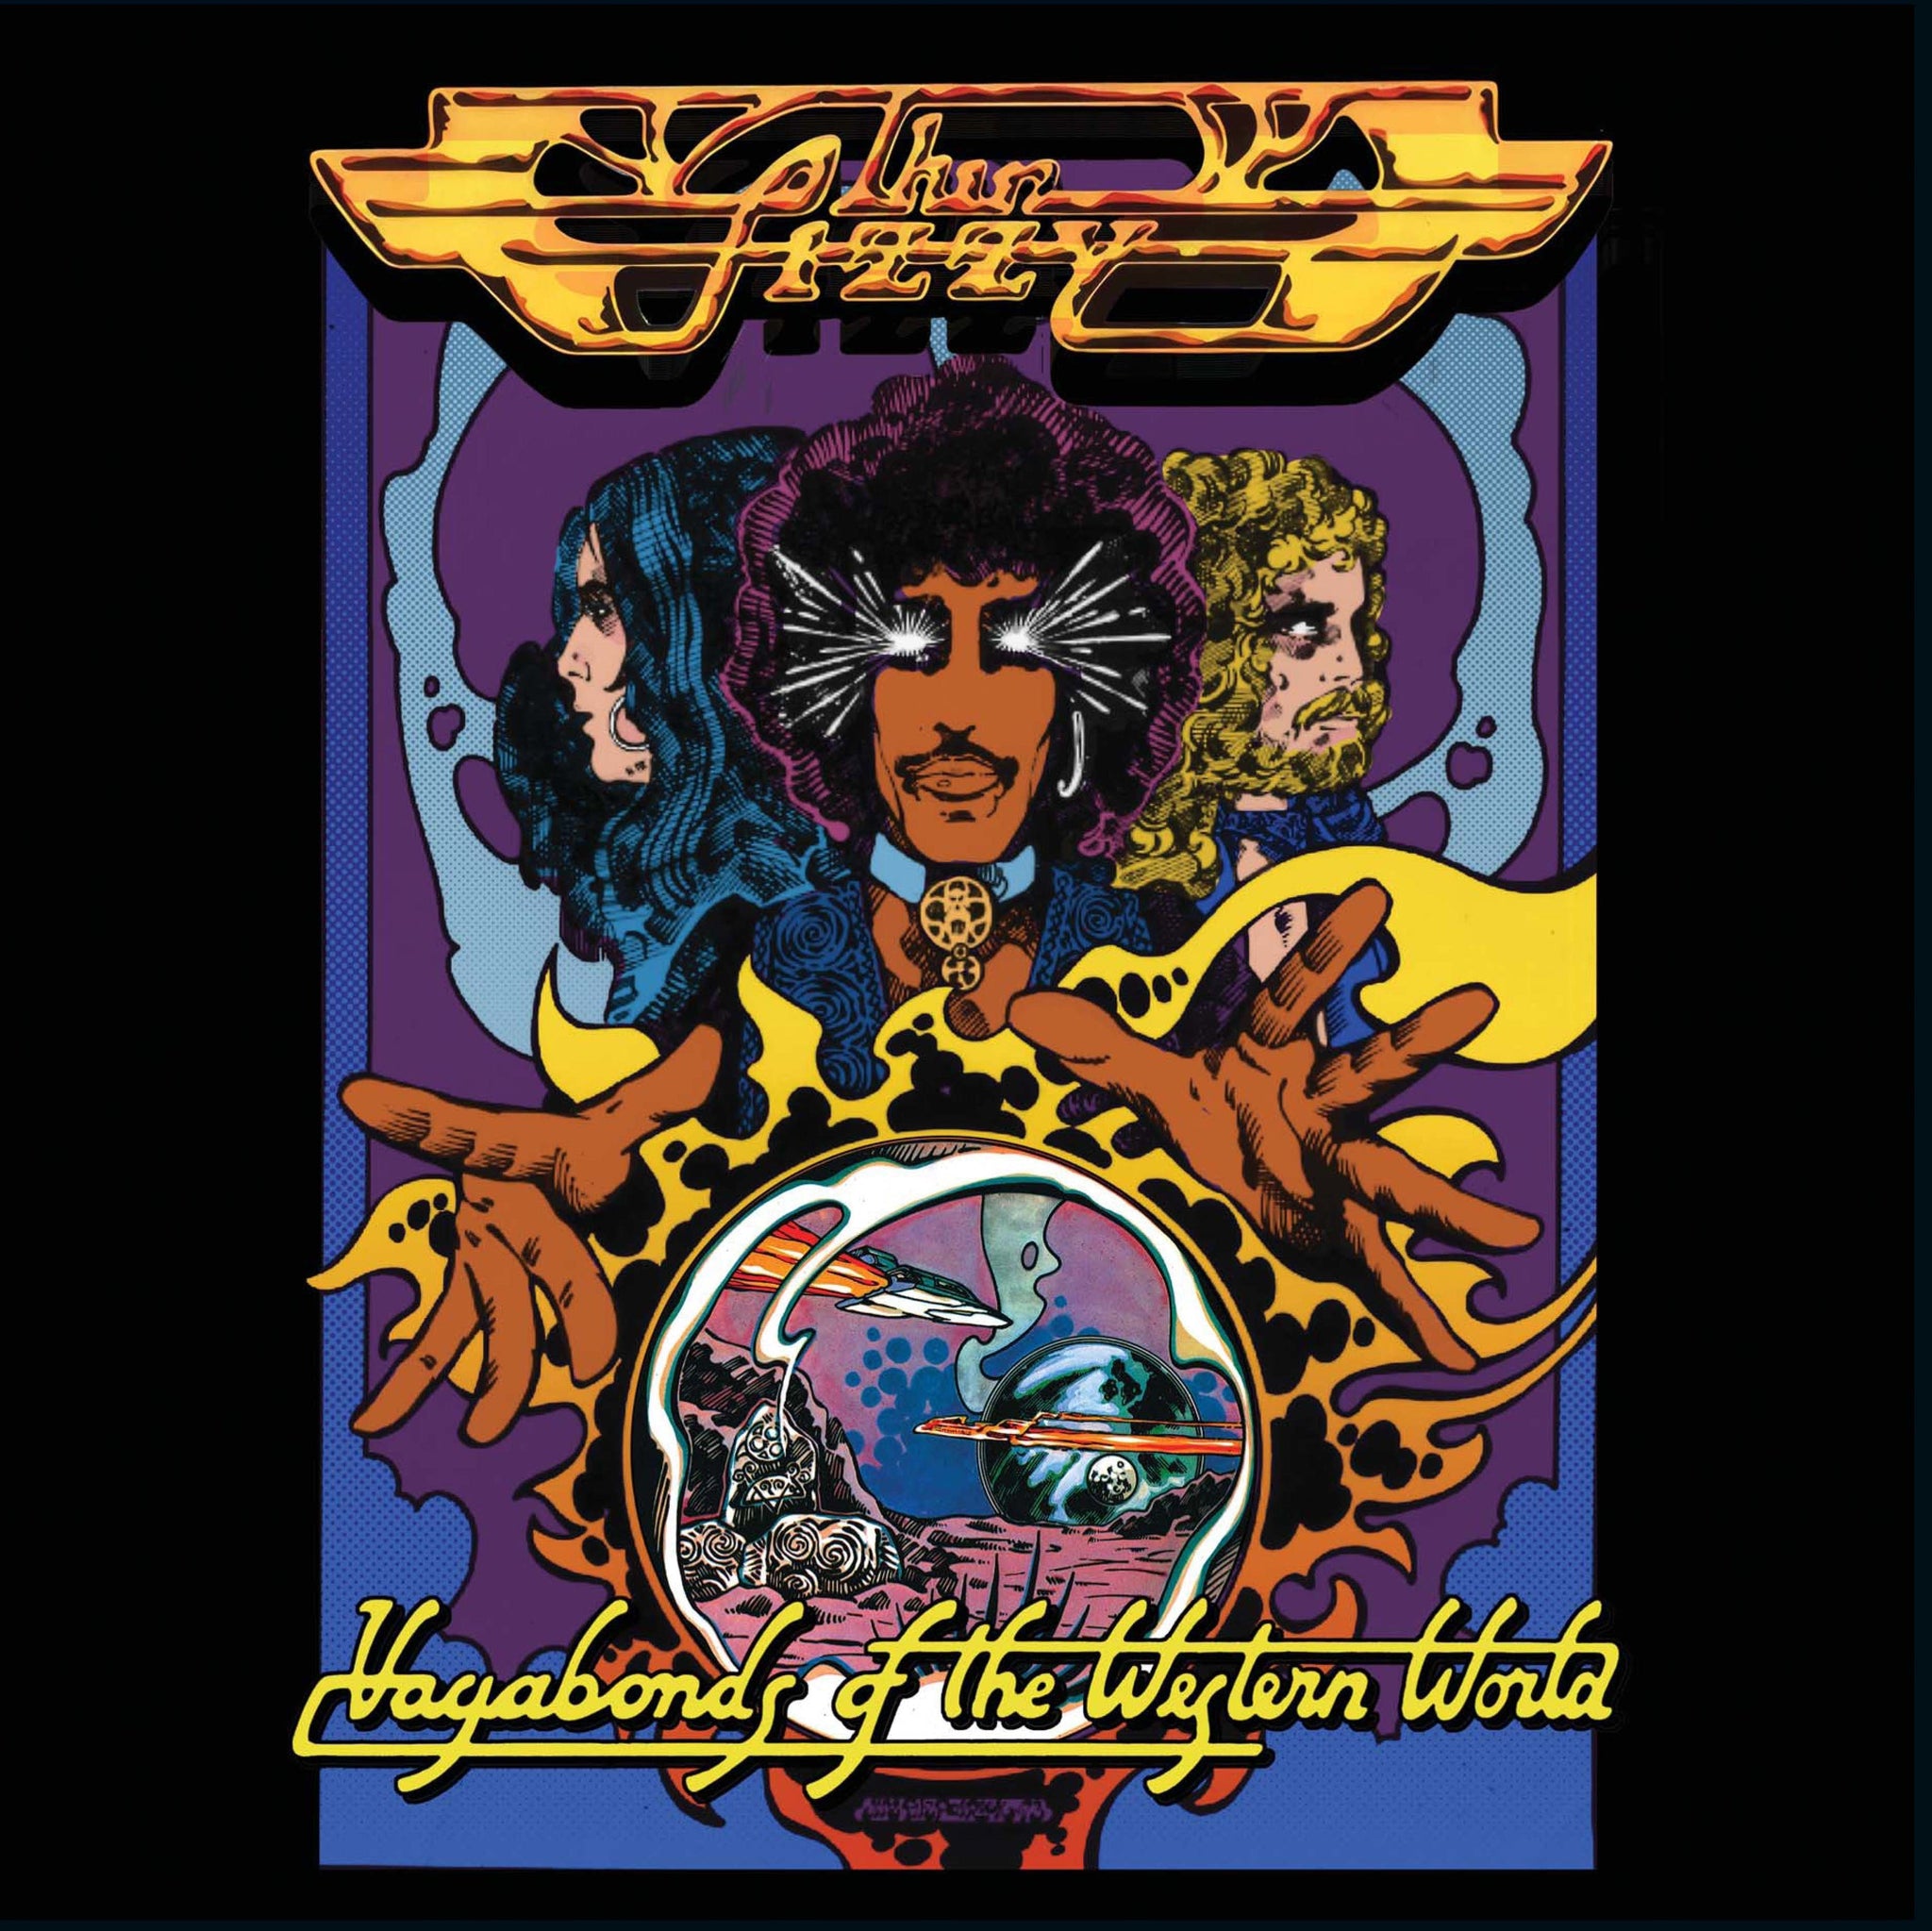 THIN LIZZY - Vagabonds of the Western World (Deluxe Reissue) - 3CD + Blu-Ray [NOV 17]